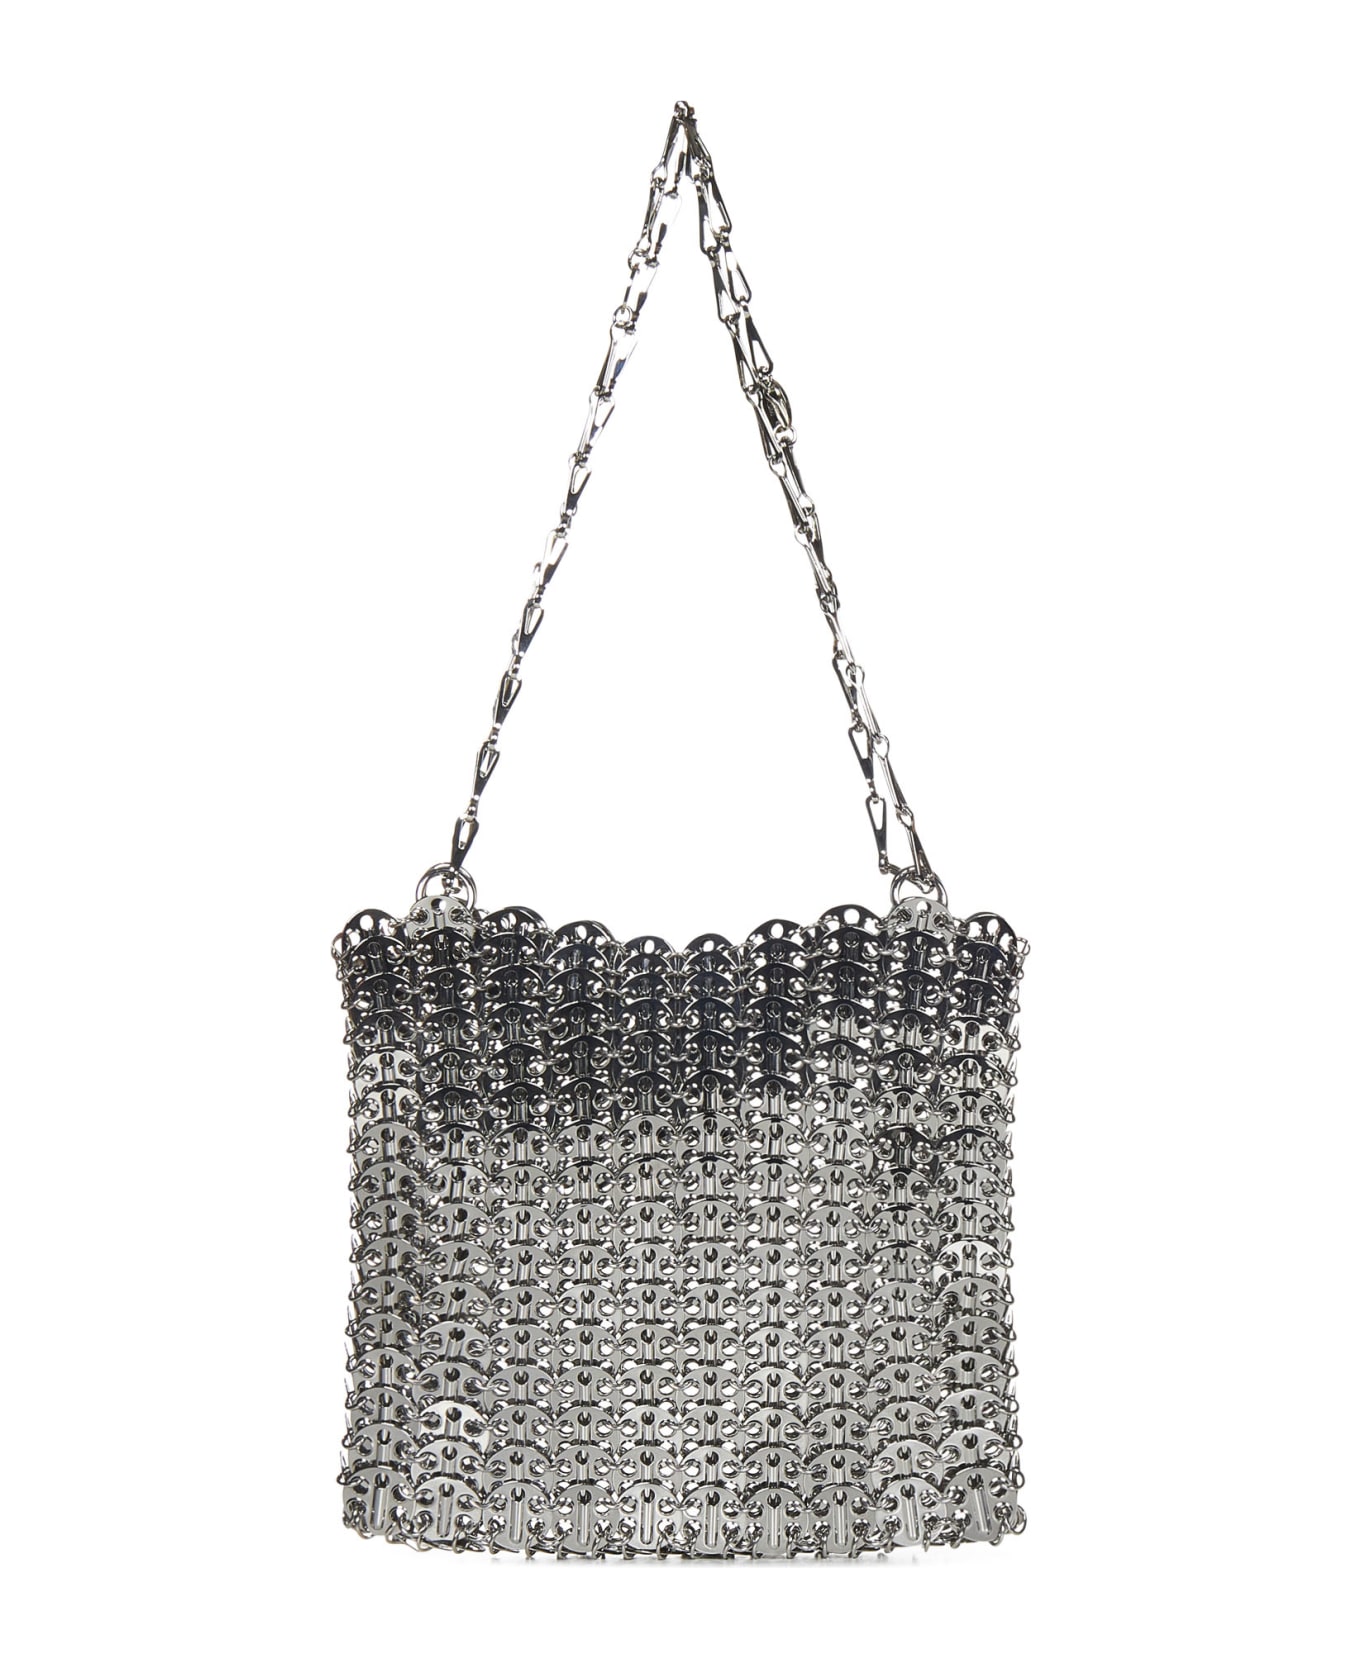 Paco Rabanne Iconic Silver 1969 Shoulder Bag - Silver